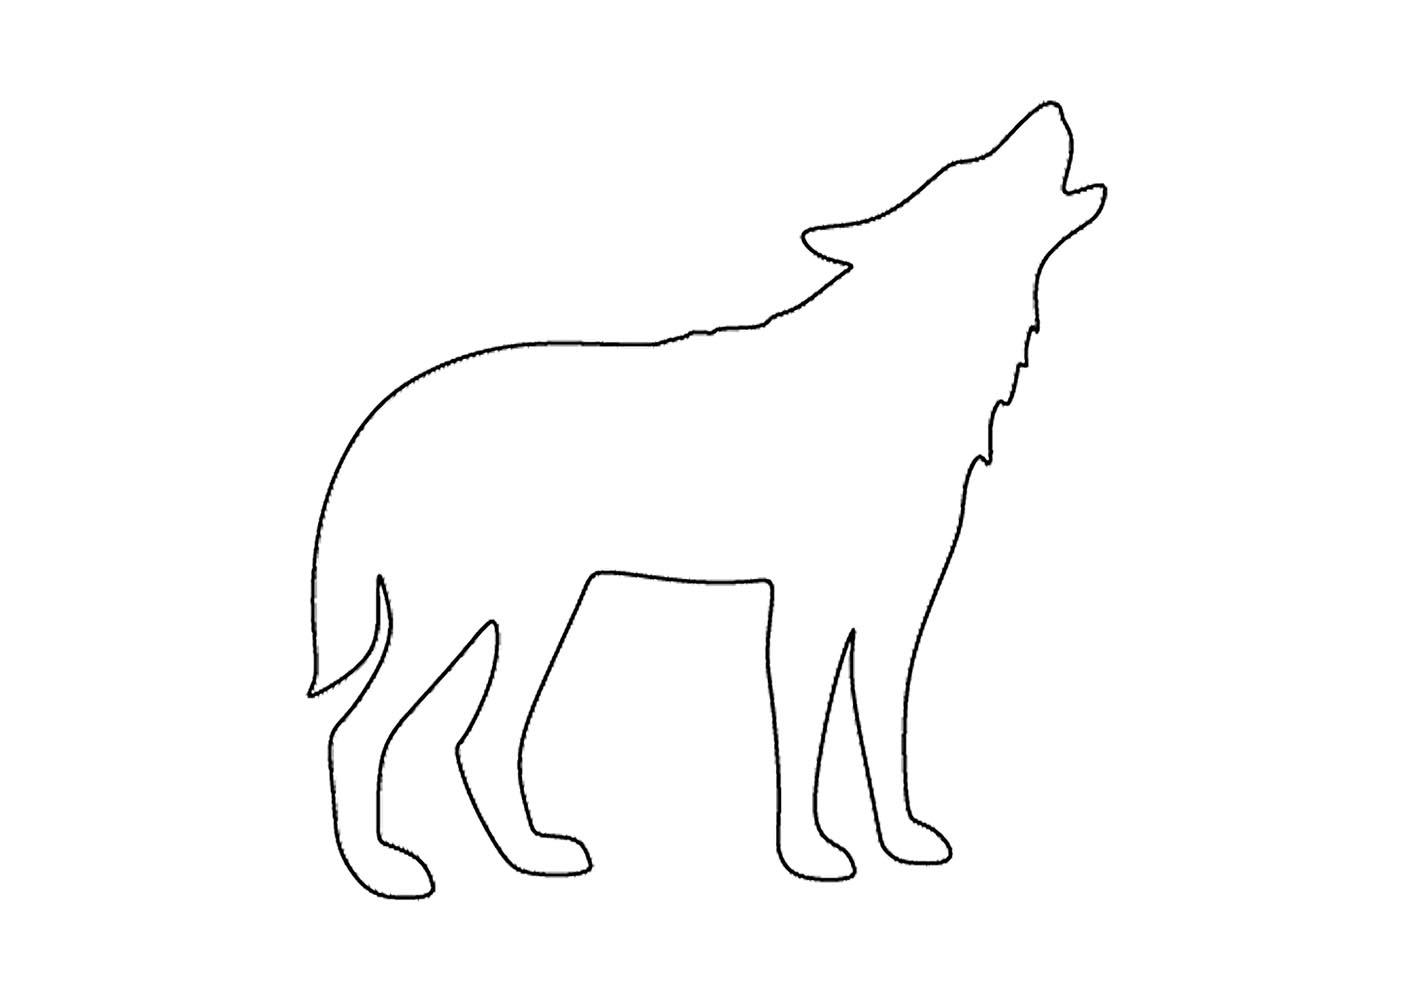 Wolf stencils - Free stencils and template cutout printable